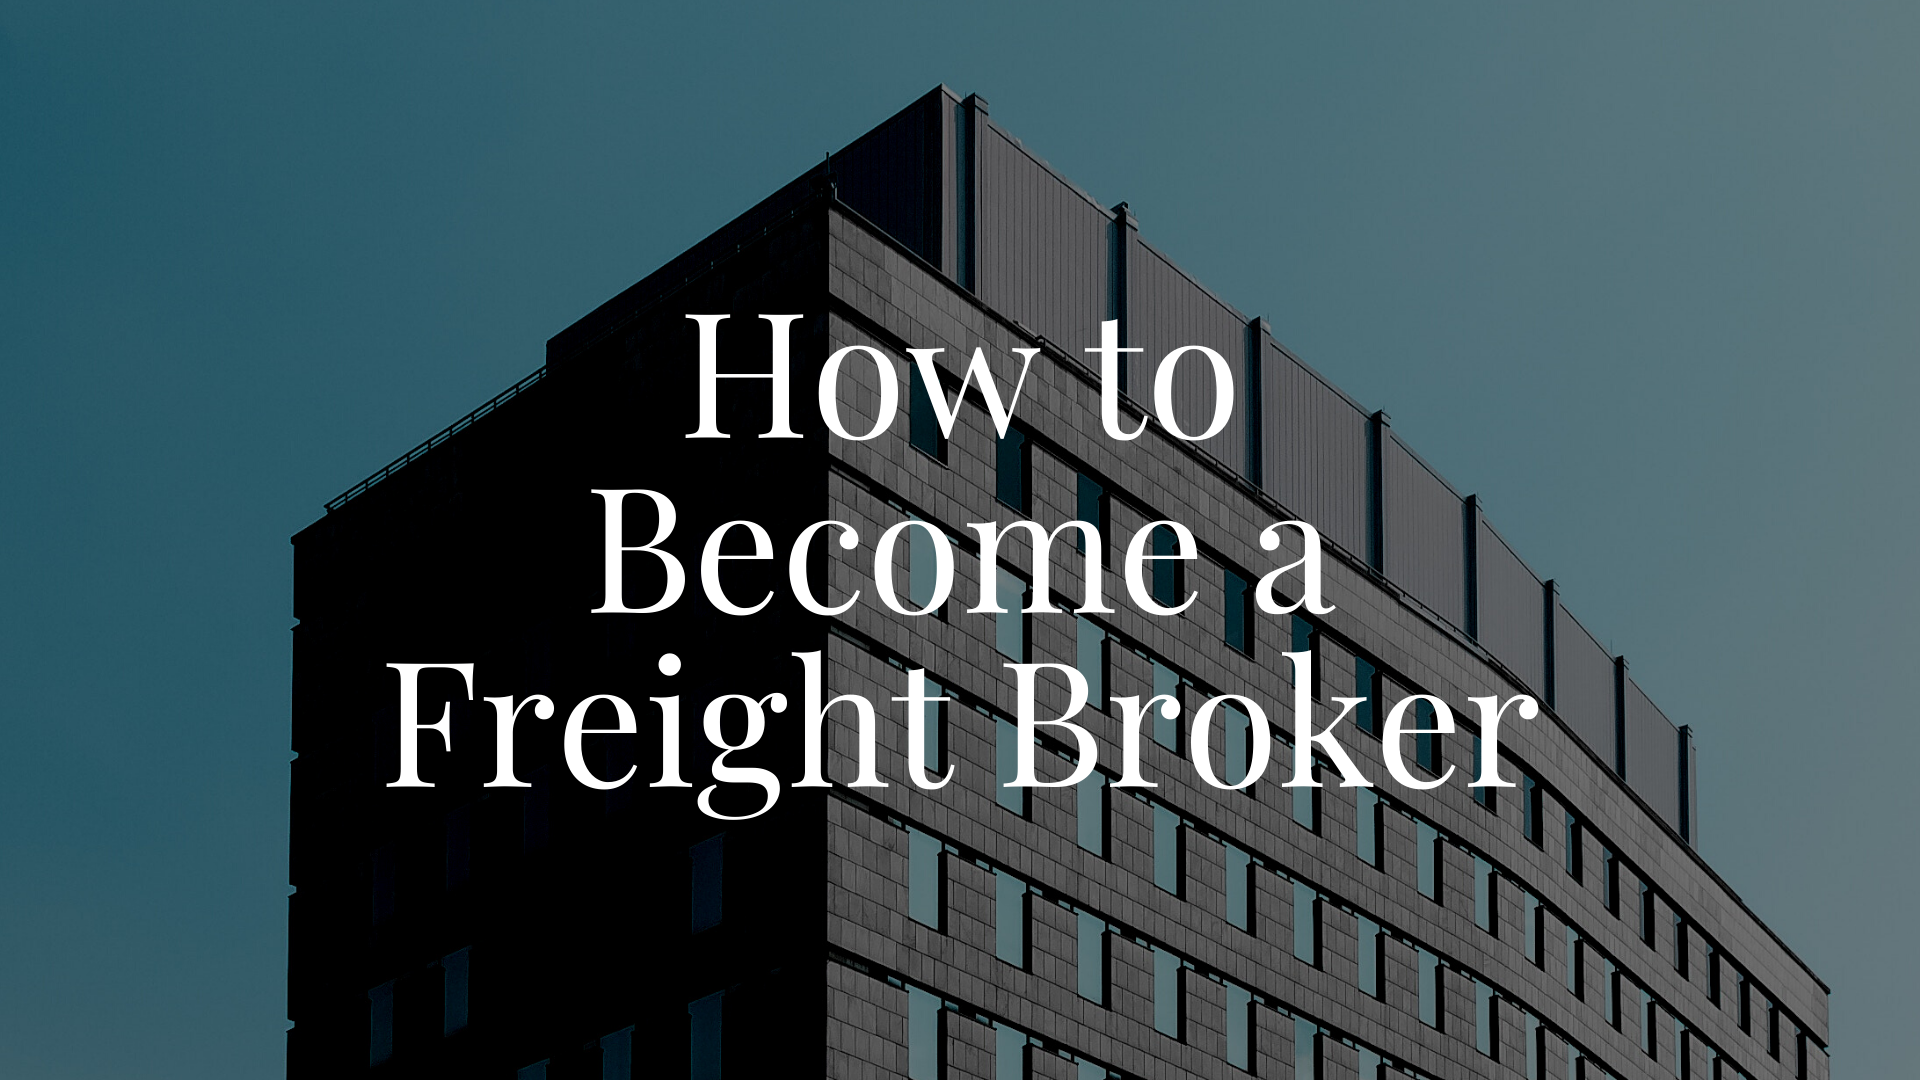 surety bond - What is a freight broker - building with lots of windows